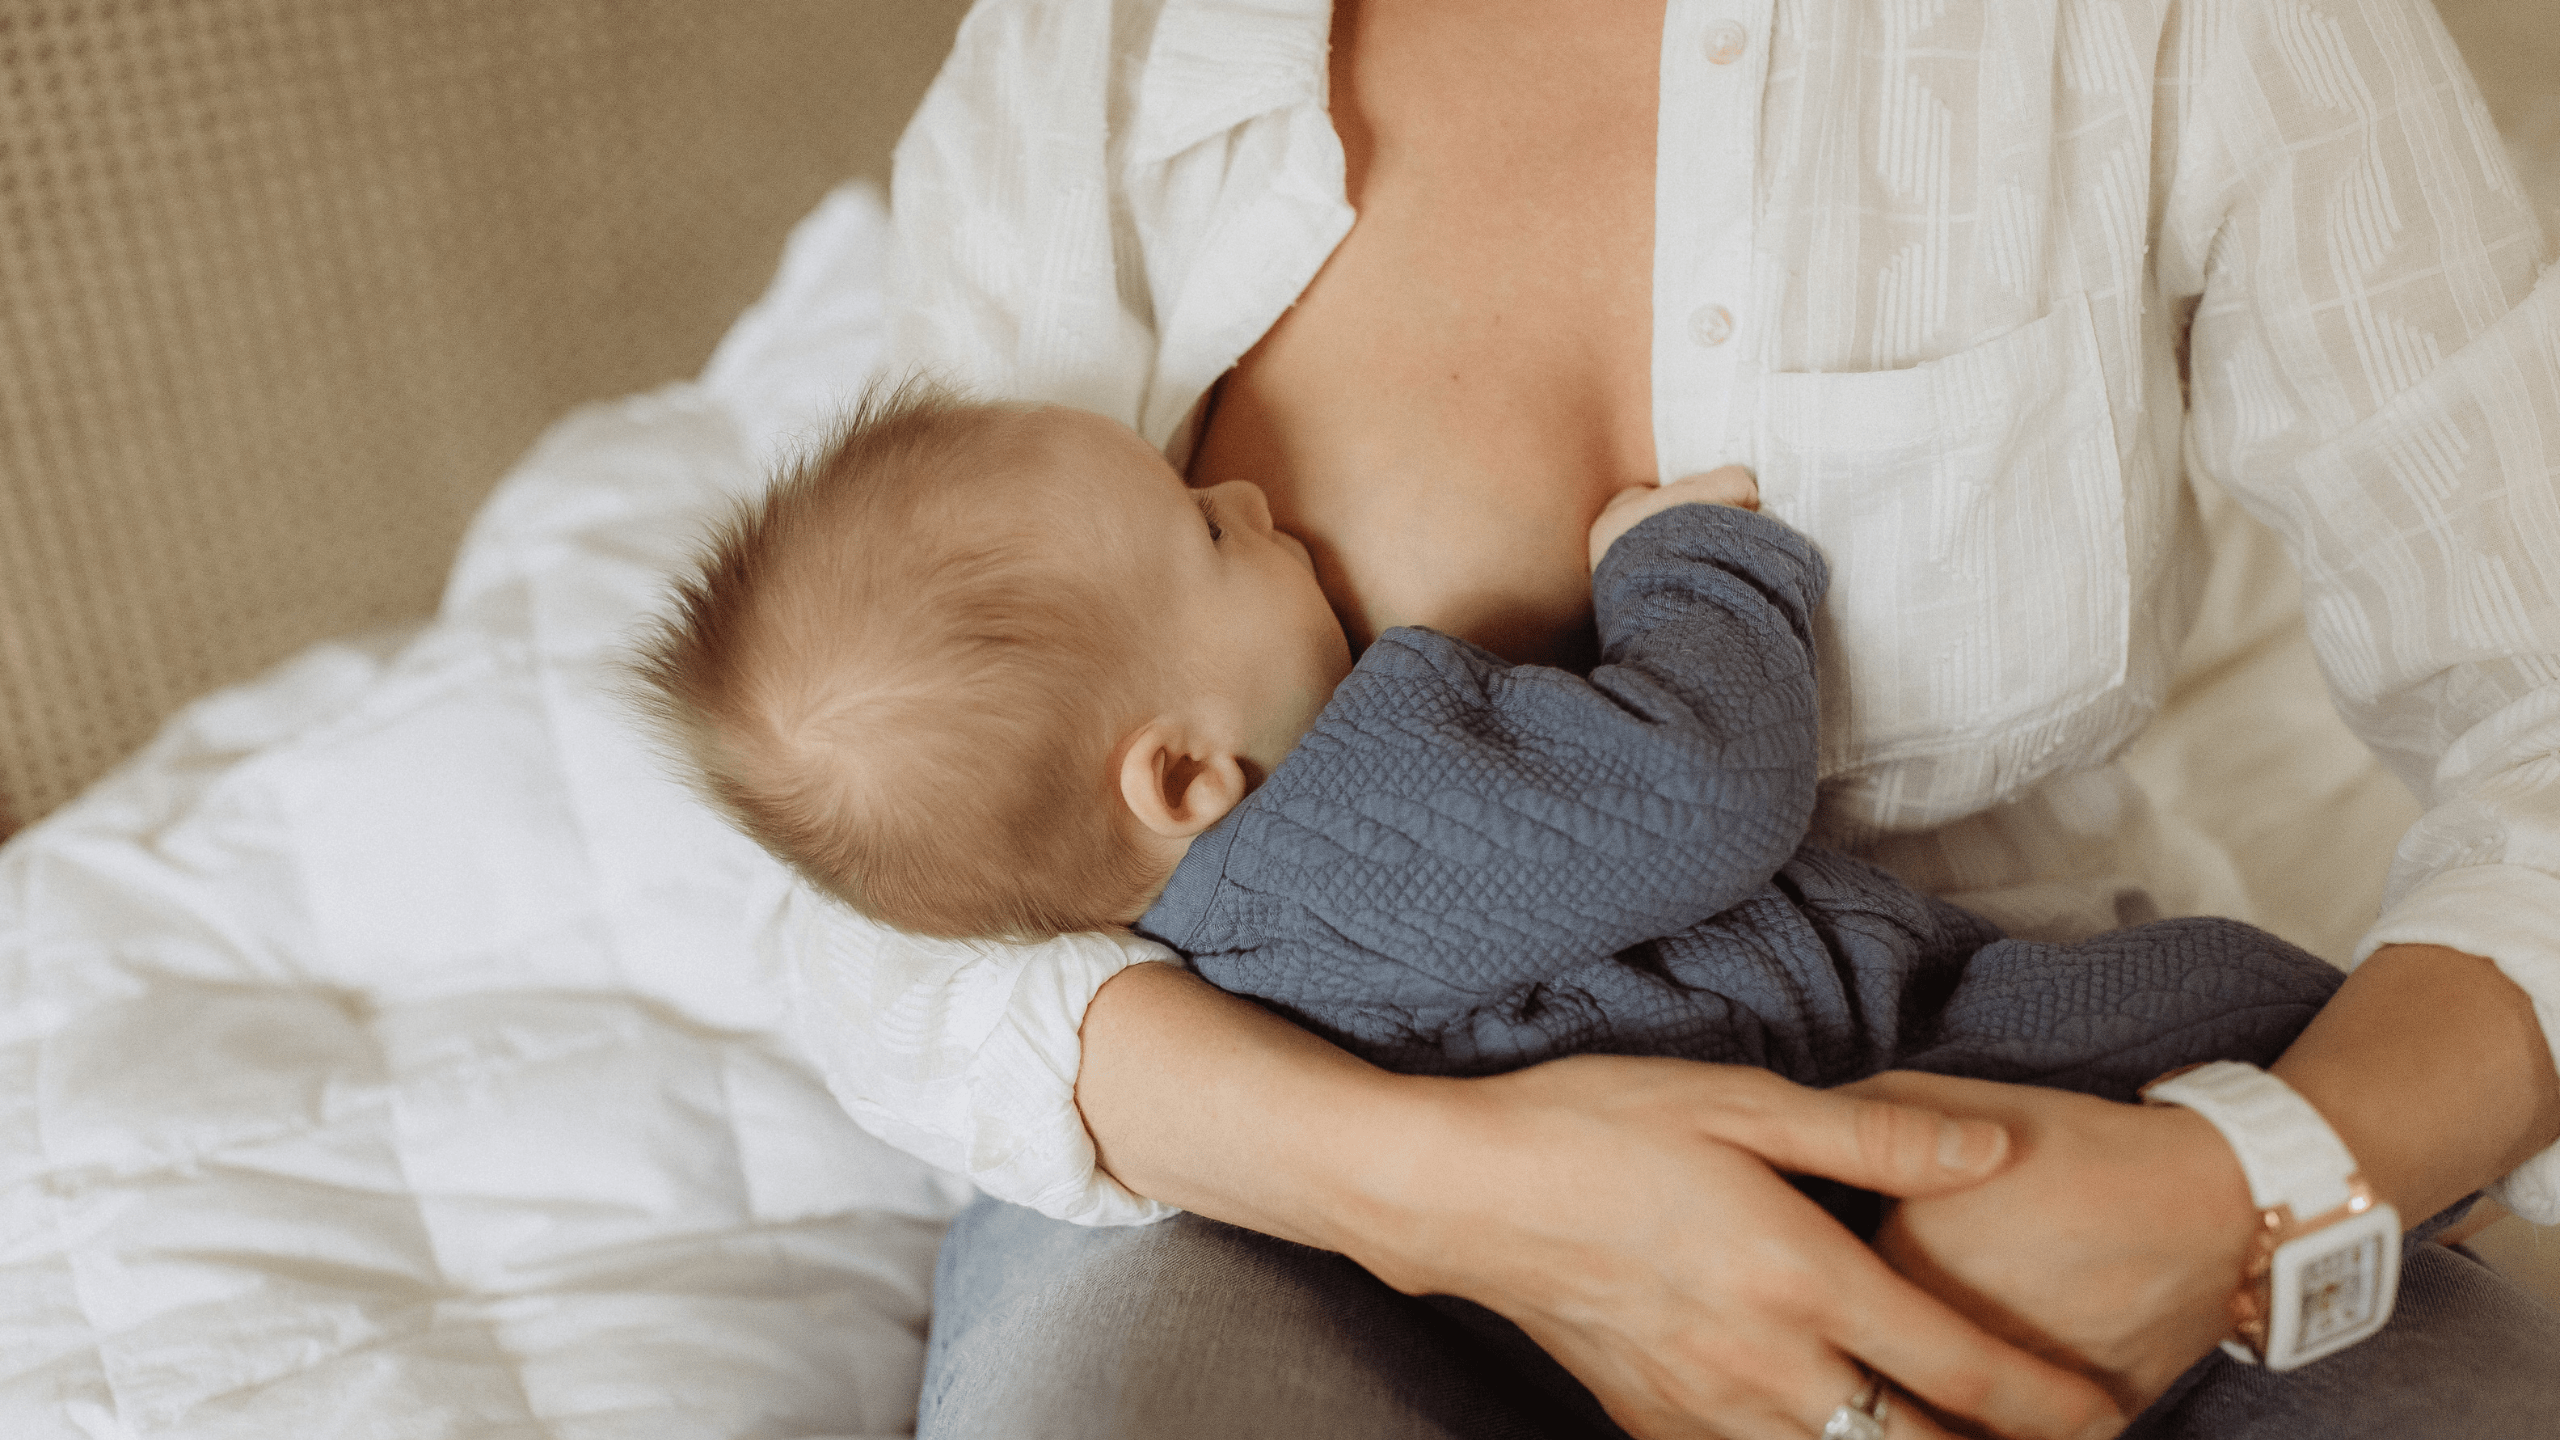 The Importance of Breastfeeding for Babies Better Than Formula